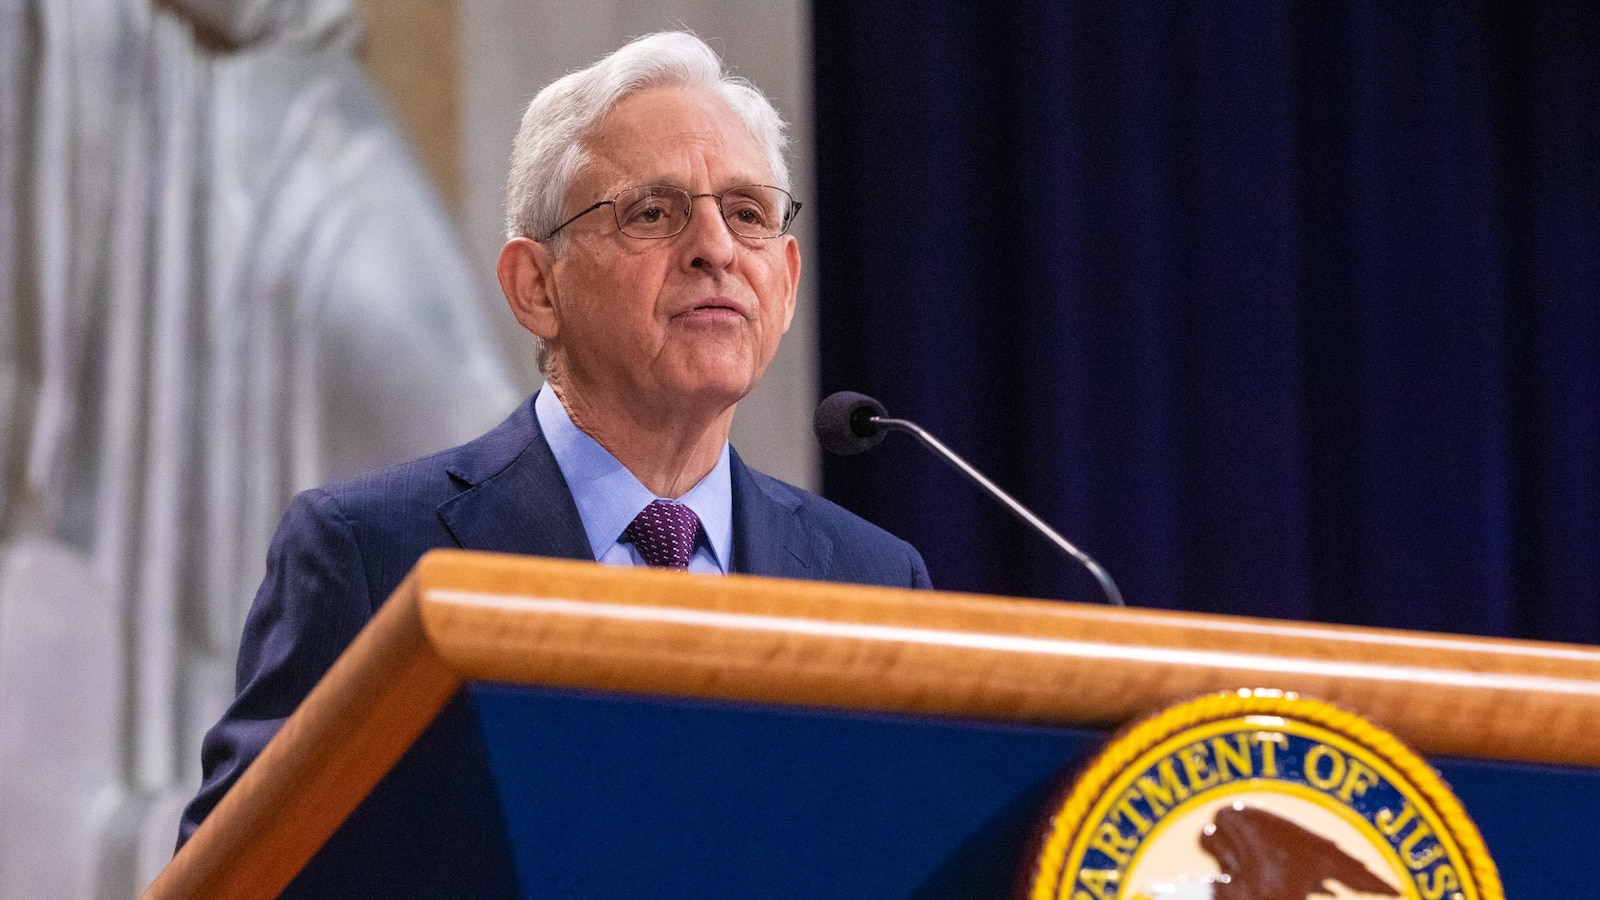 Republican’s effort to hold Merrick Garland in inherent contempt fails in House vote